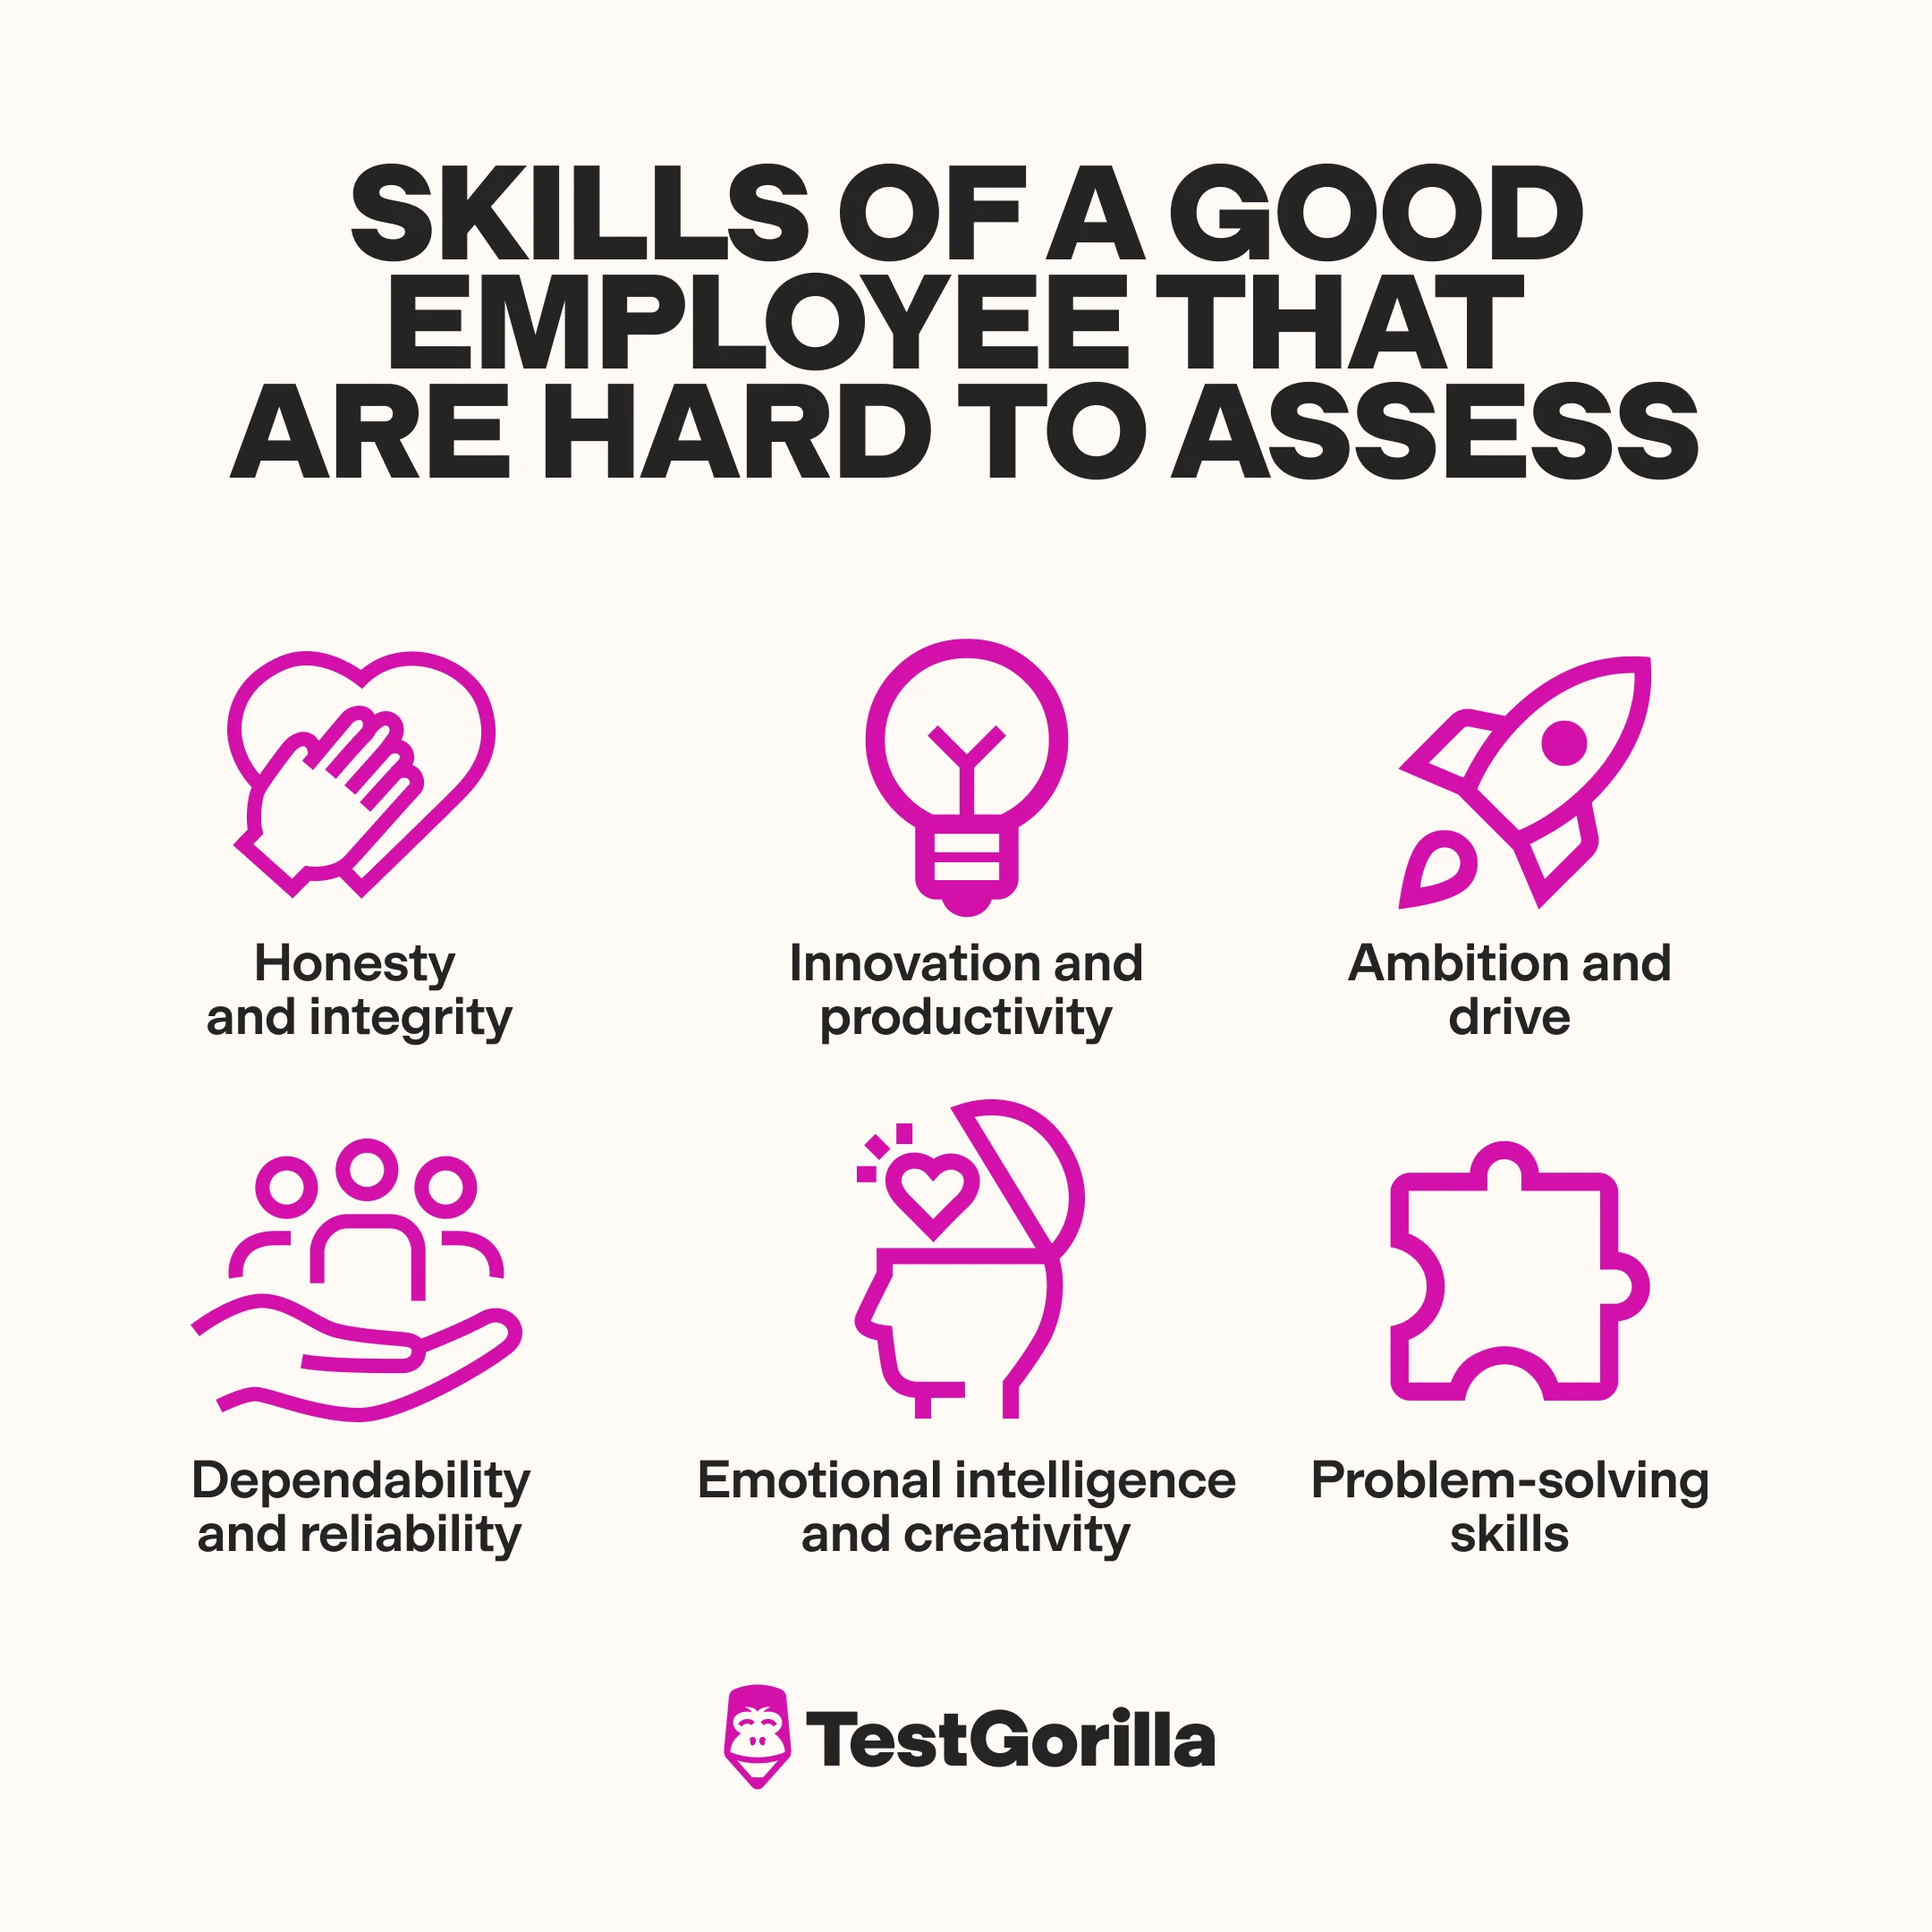 What are some skills of a good employee that are hard to assess